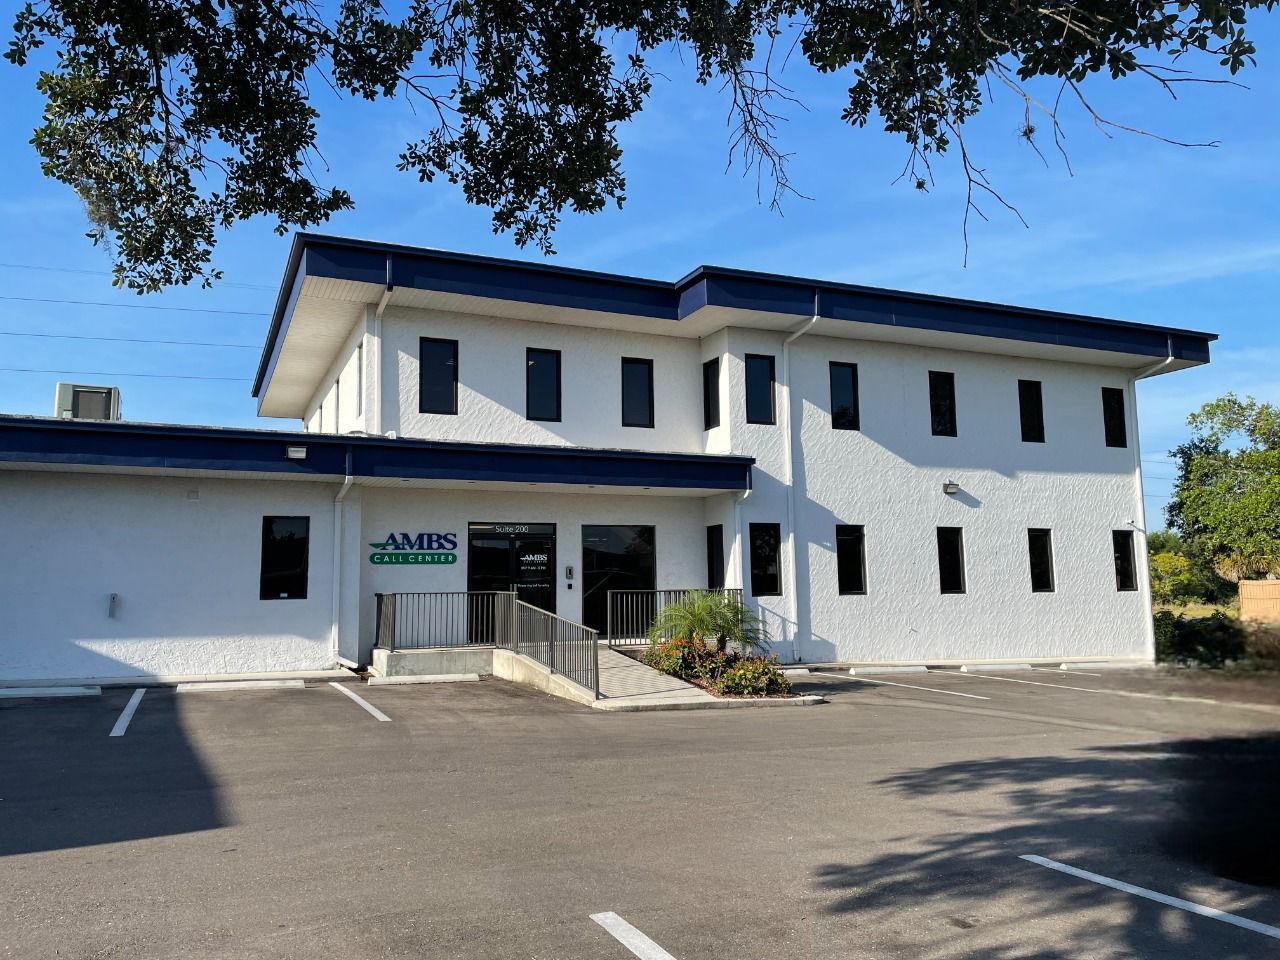 Ambs Call Centers Tampa Office Building